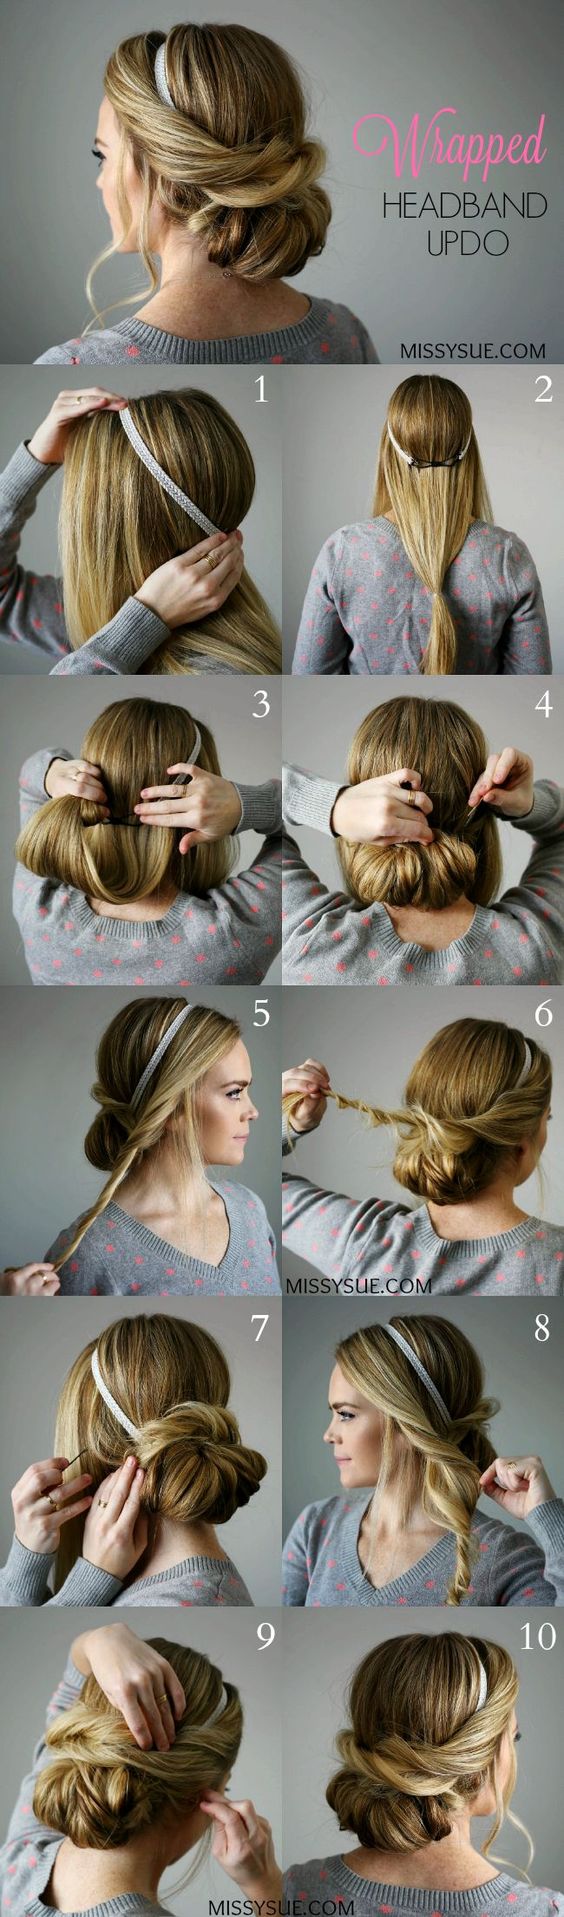 hairstyle-girls-pretty-fast-simple